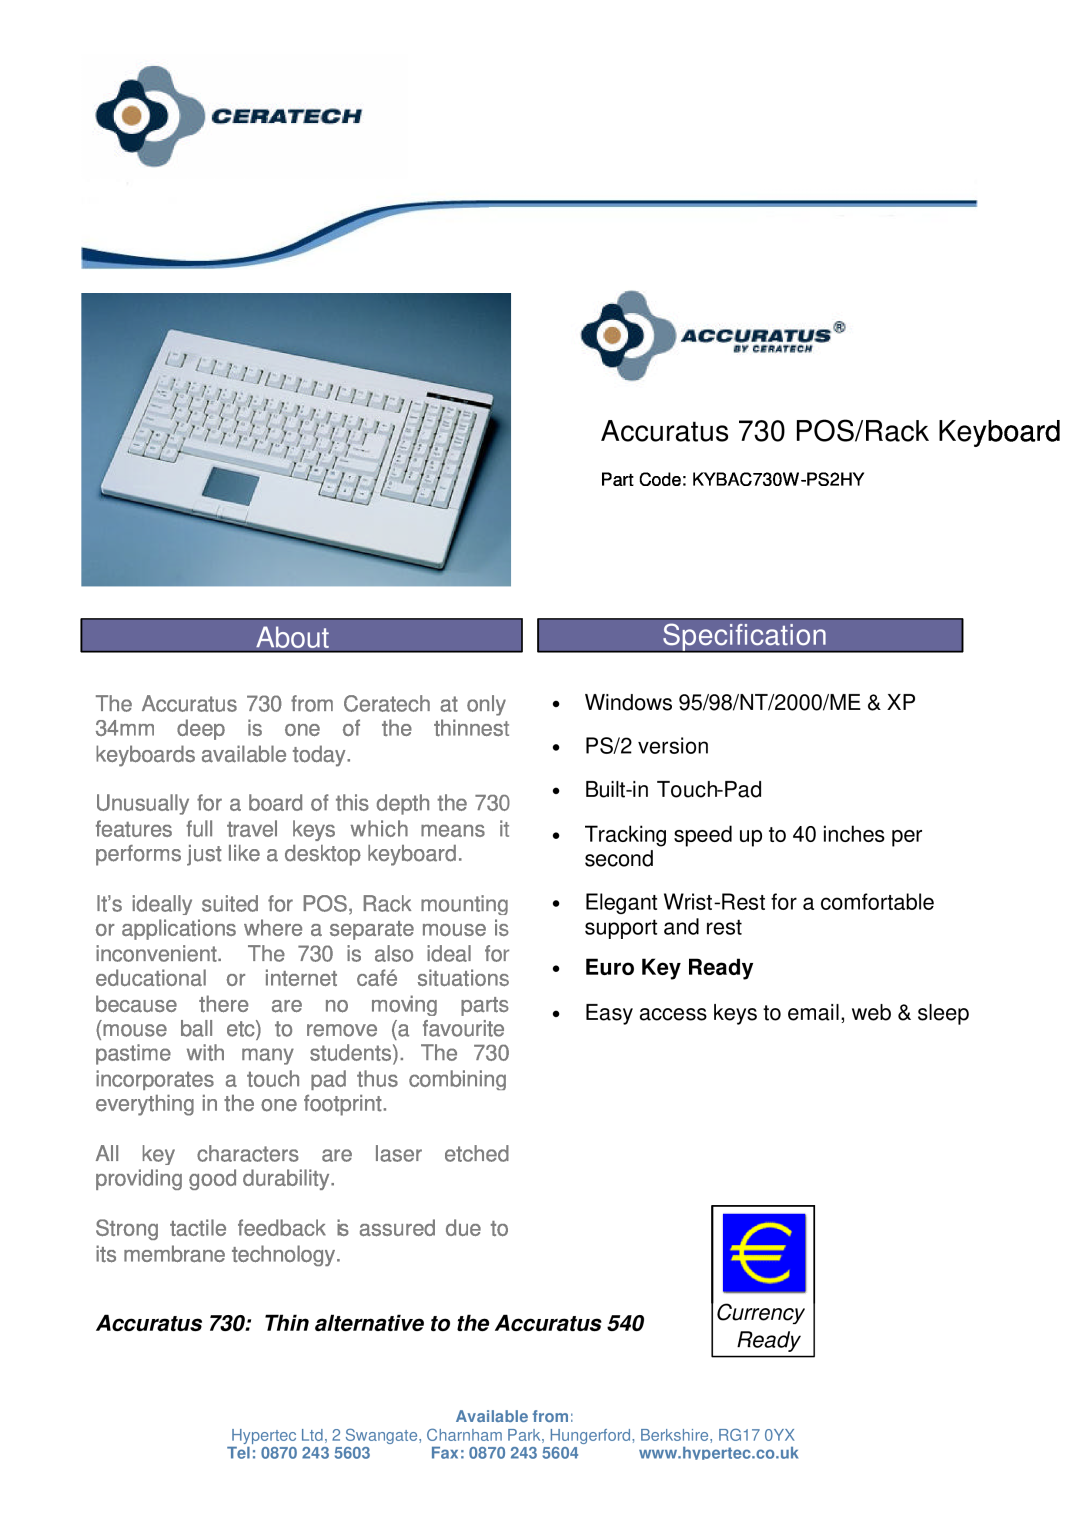 Hypertec manual About, Accuratus 730 POS/Rack Keyboard, Specification, ∙ Euro Key Ready, Currency Ready 